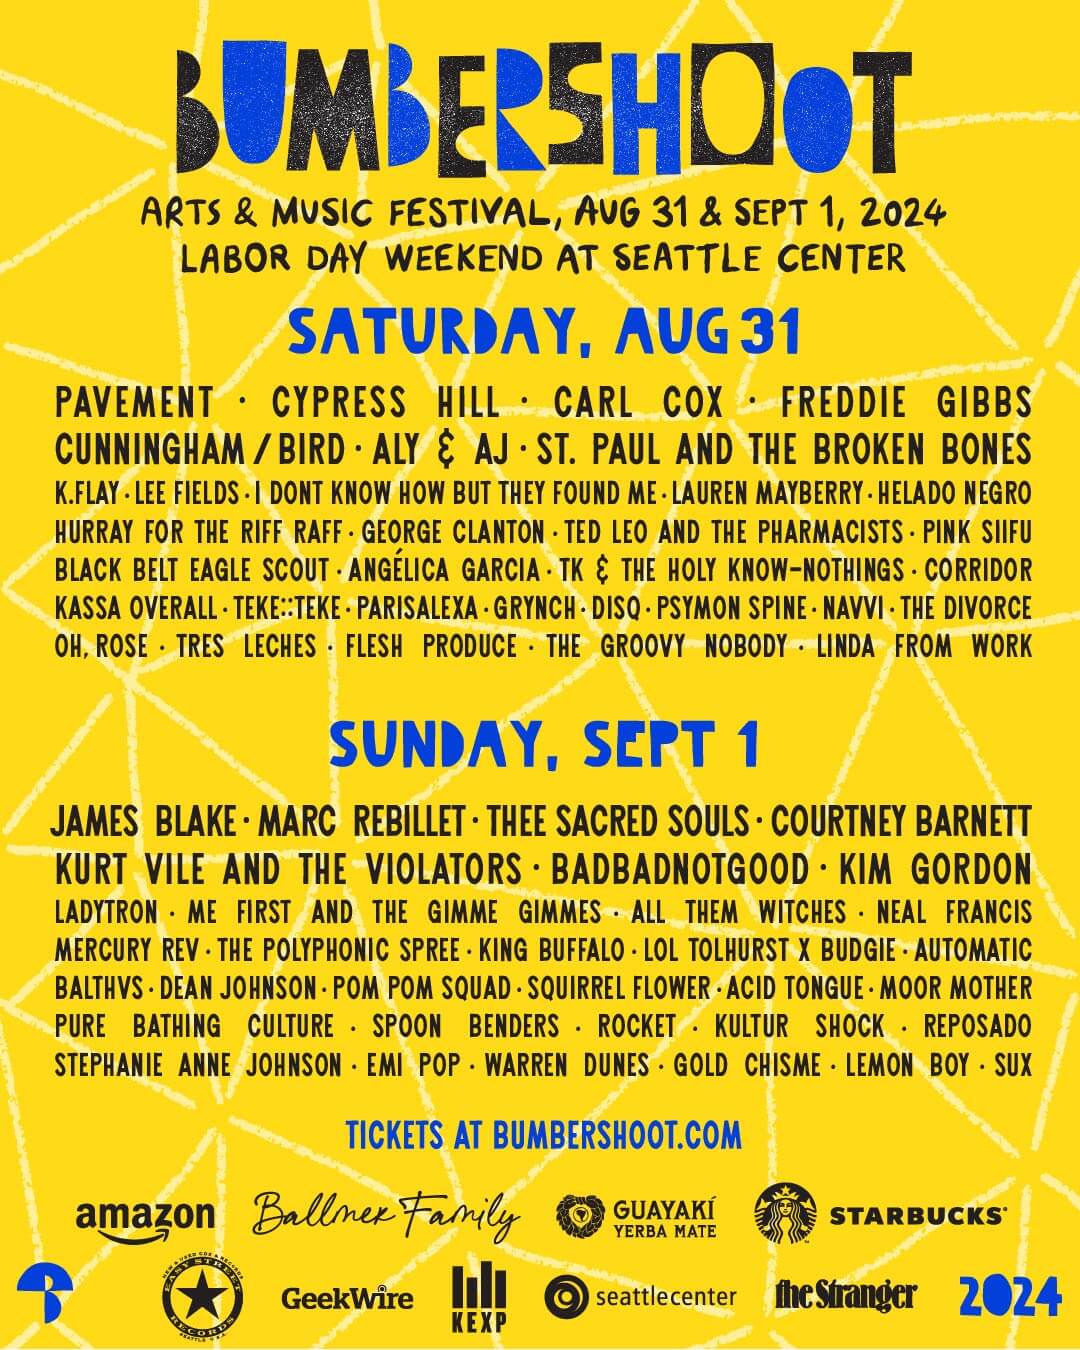 The 2024 edition of the Bumbershoot Arts and Music Festival takes place on Aug 31st -September 1st. The festival takes place in Seattle, Wa